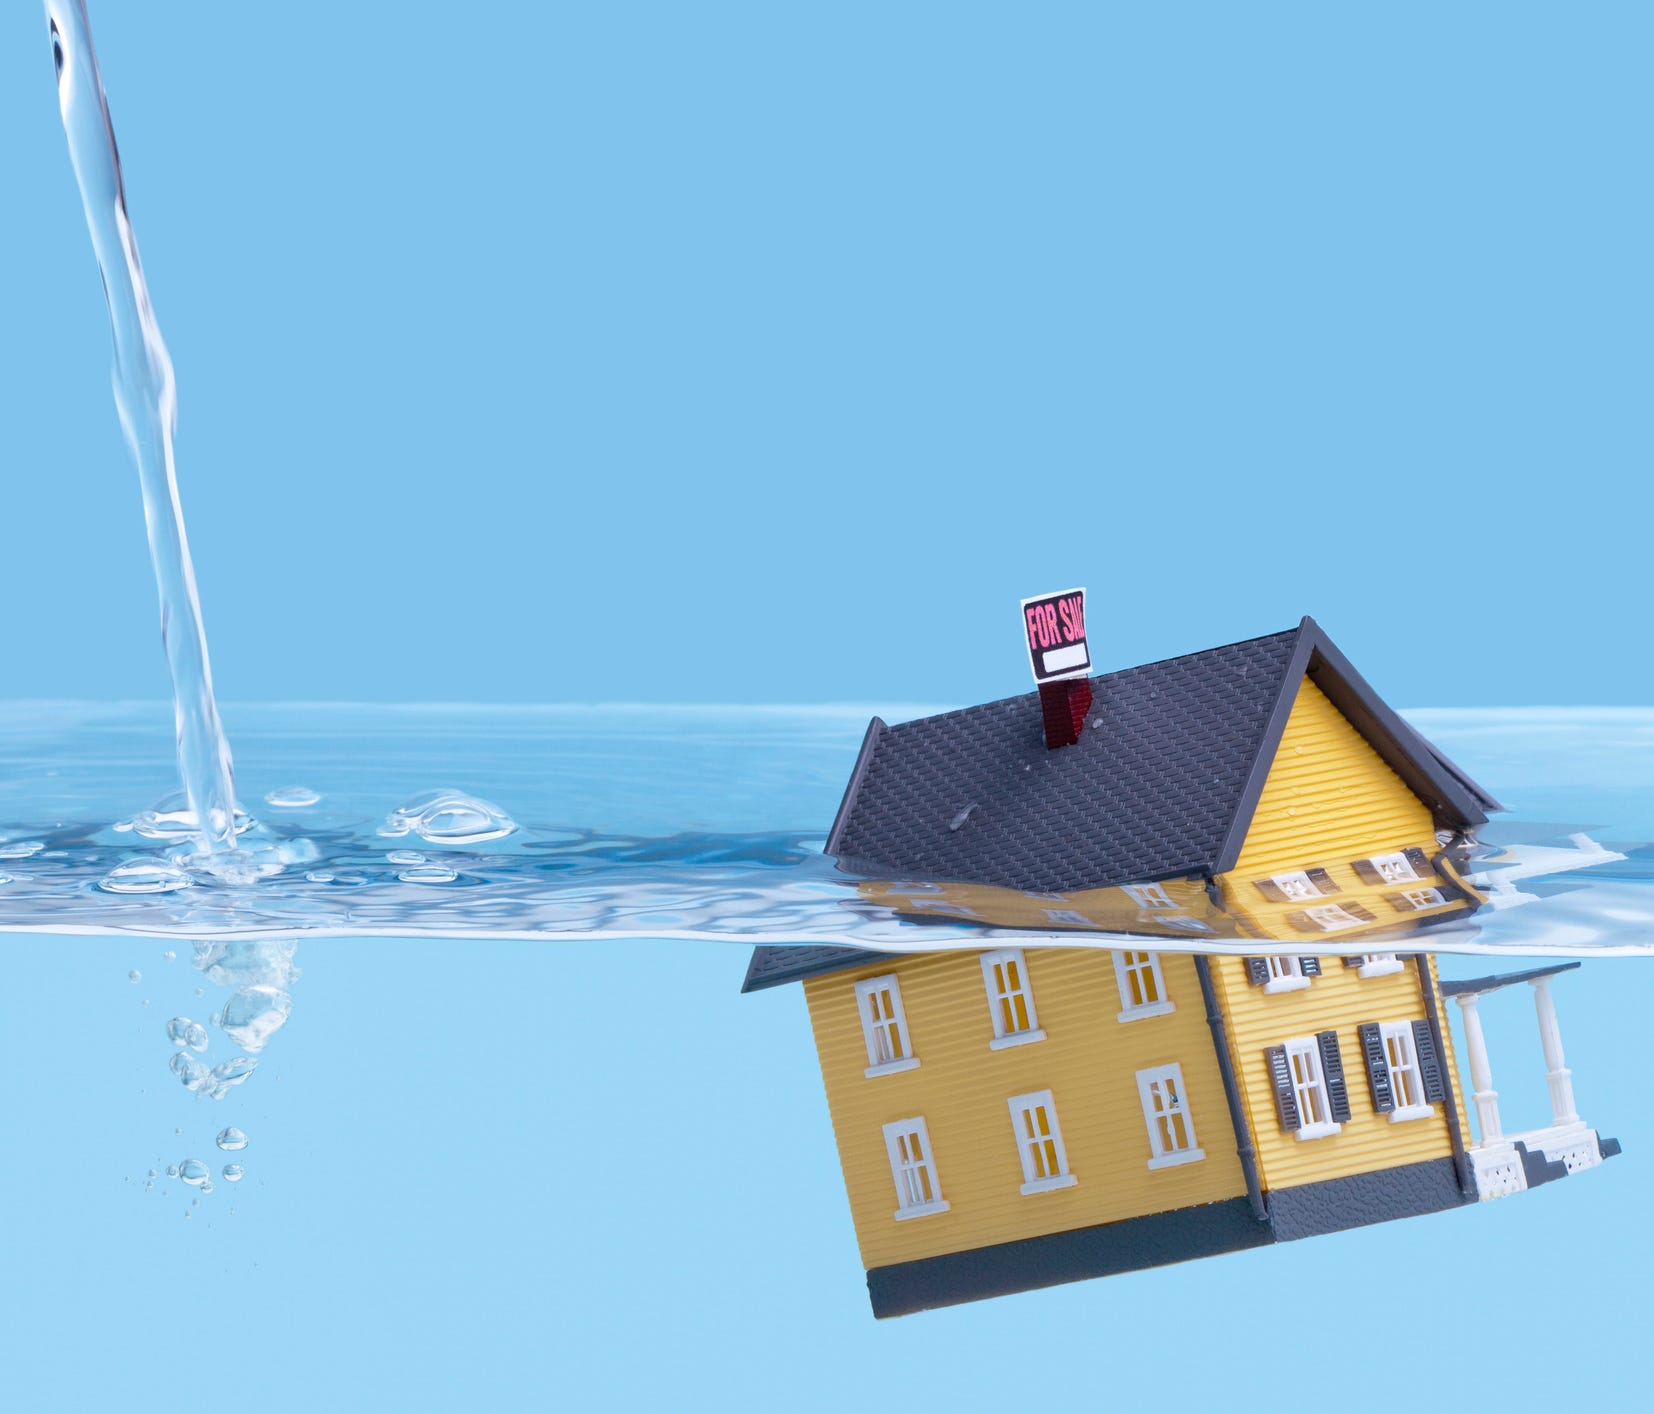 You've got several options if you are dealing with an underwater mortgage. Unfortunately, all of the options take time, effort and maybe a lawyer.